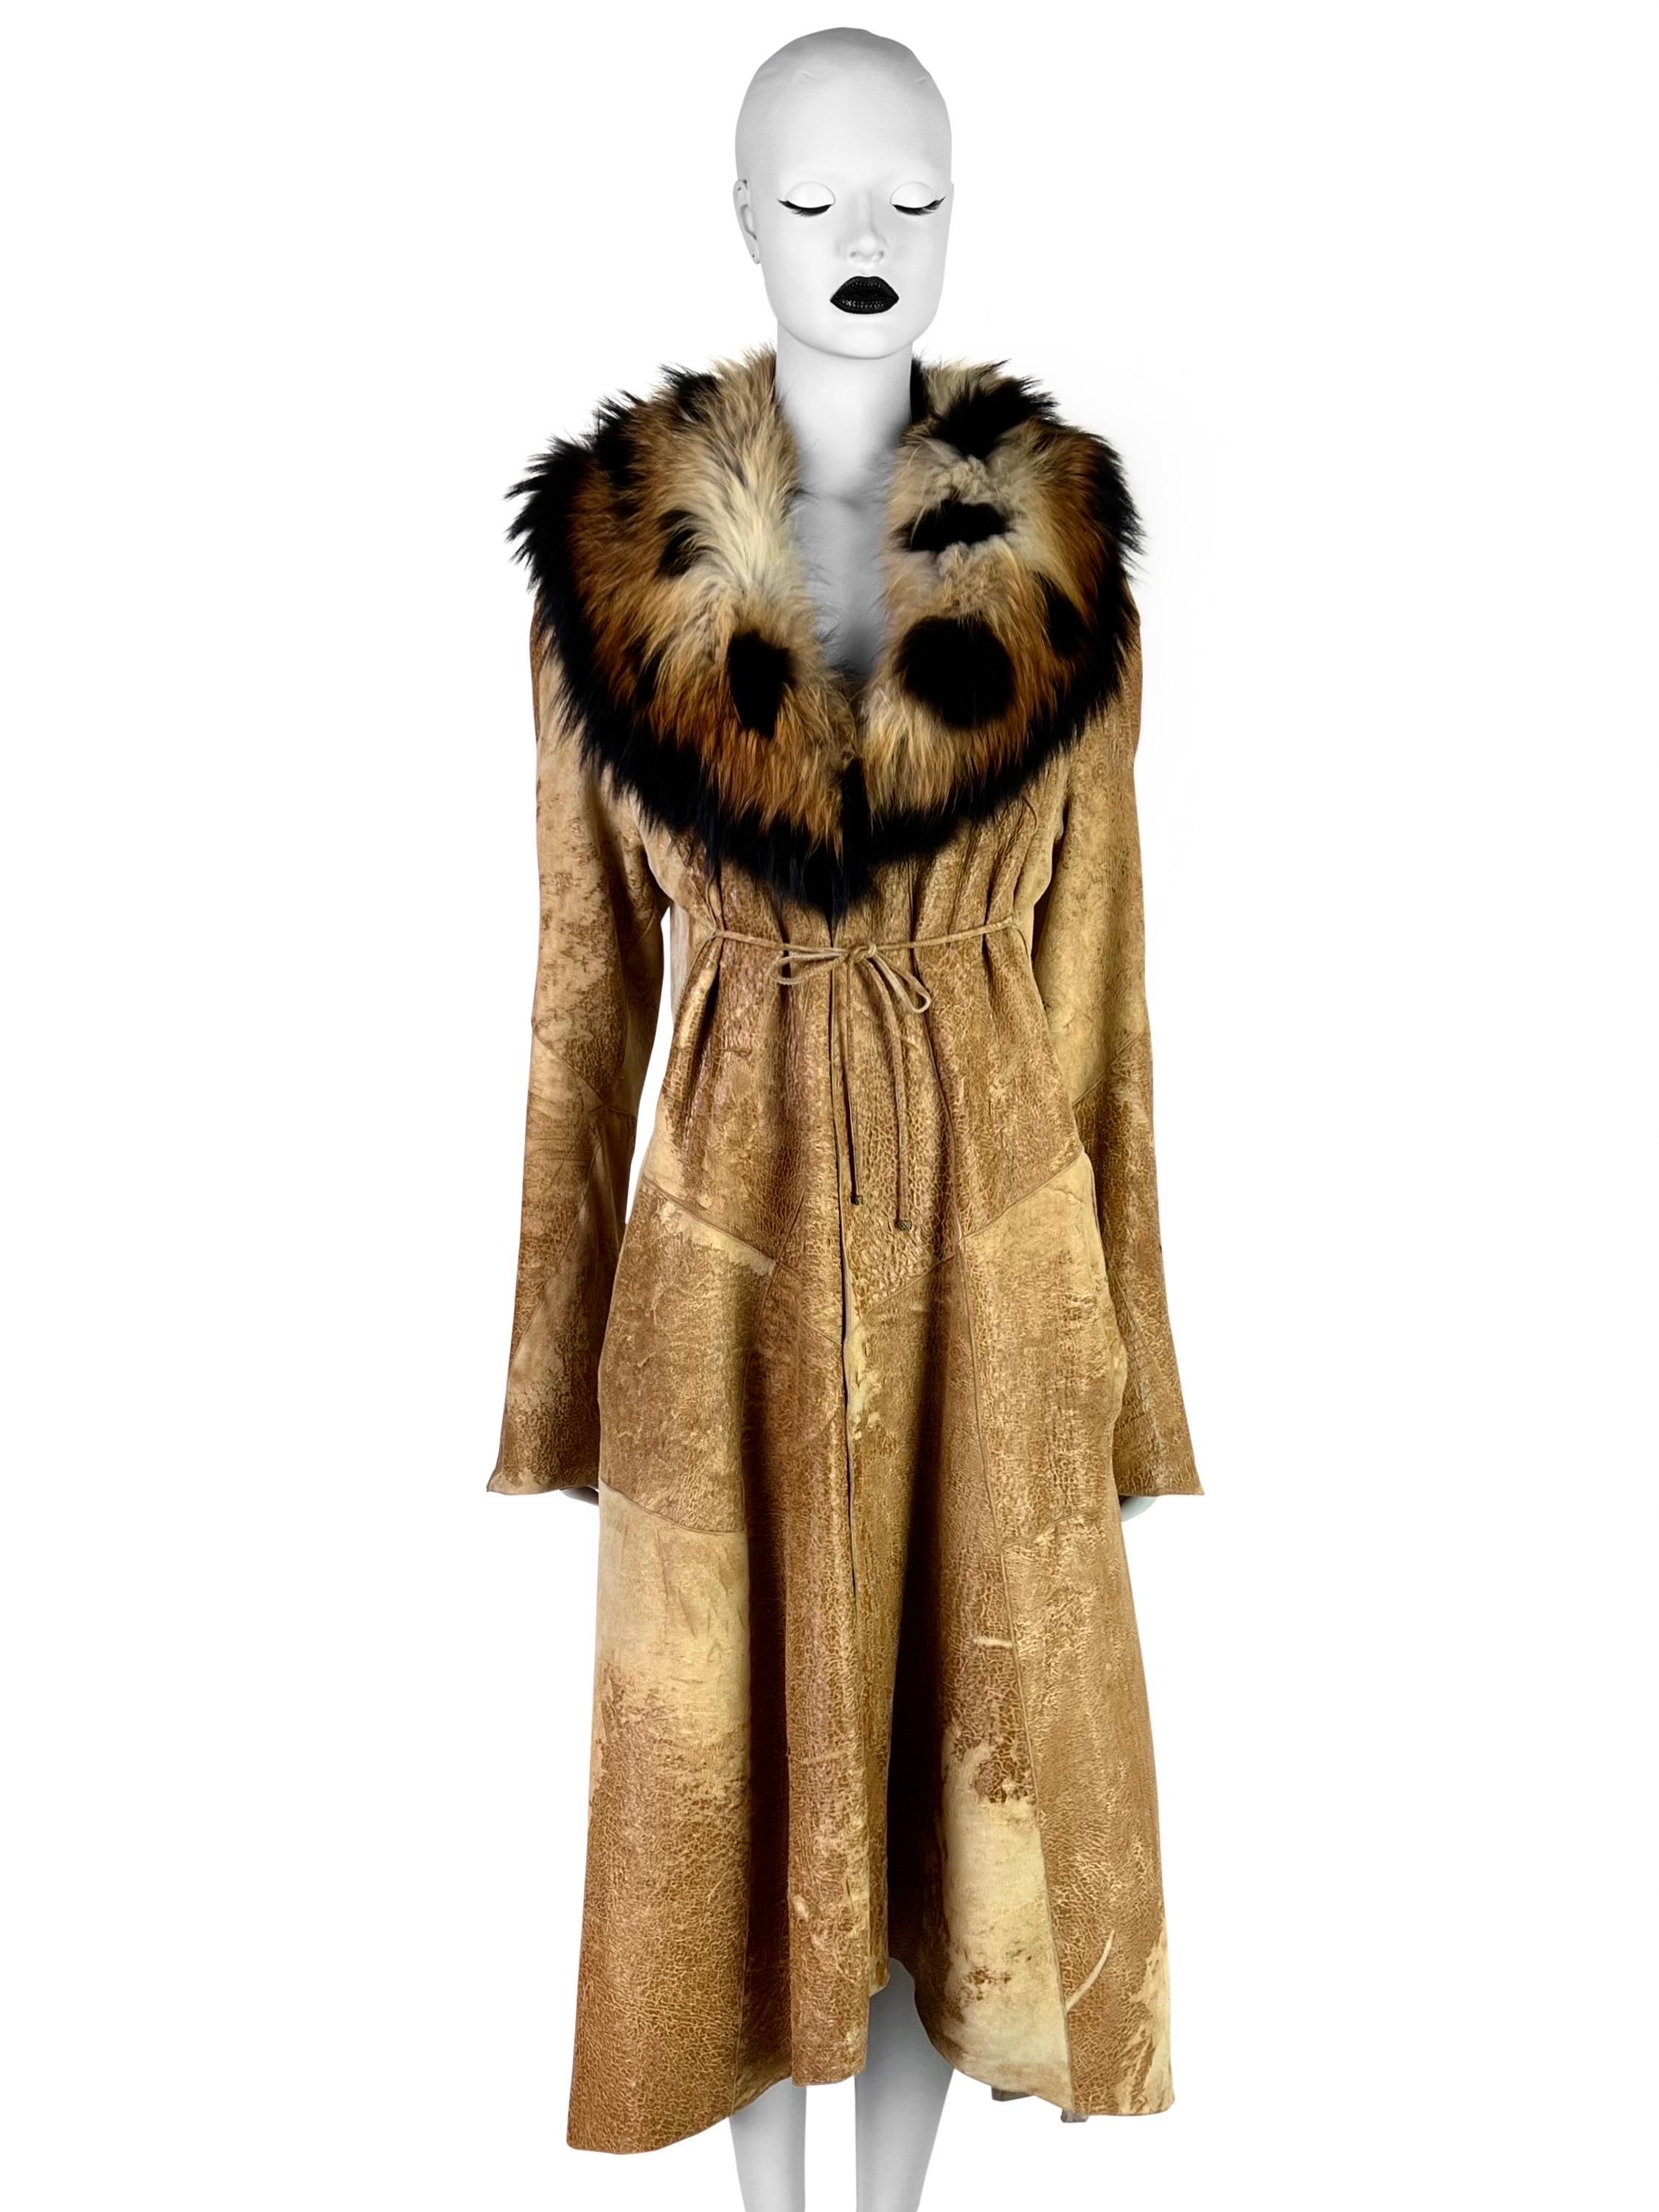 Roberto Cavalli Fall 2002 Leather Coat with Fox Fur In Excellent Condition For Sale In Prague, CZ